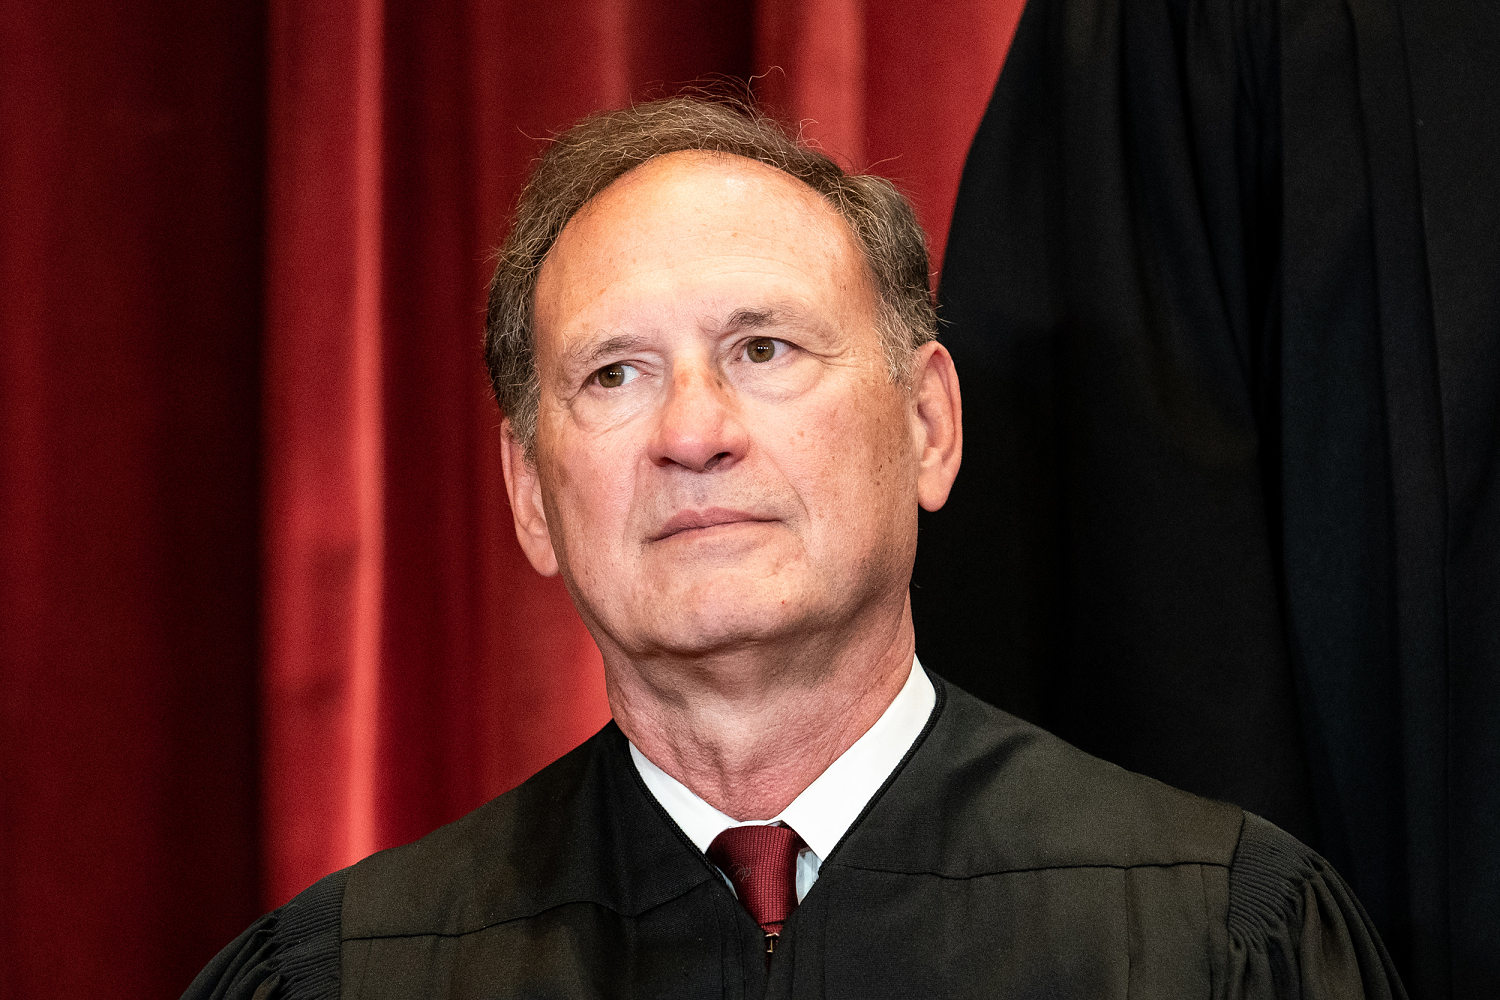 Justice Alito’s extreme approach reportedly cost him court majorities